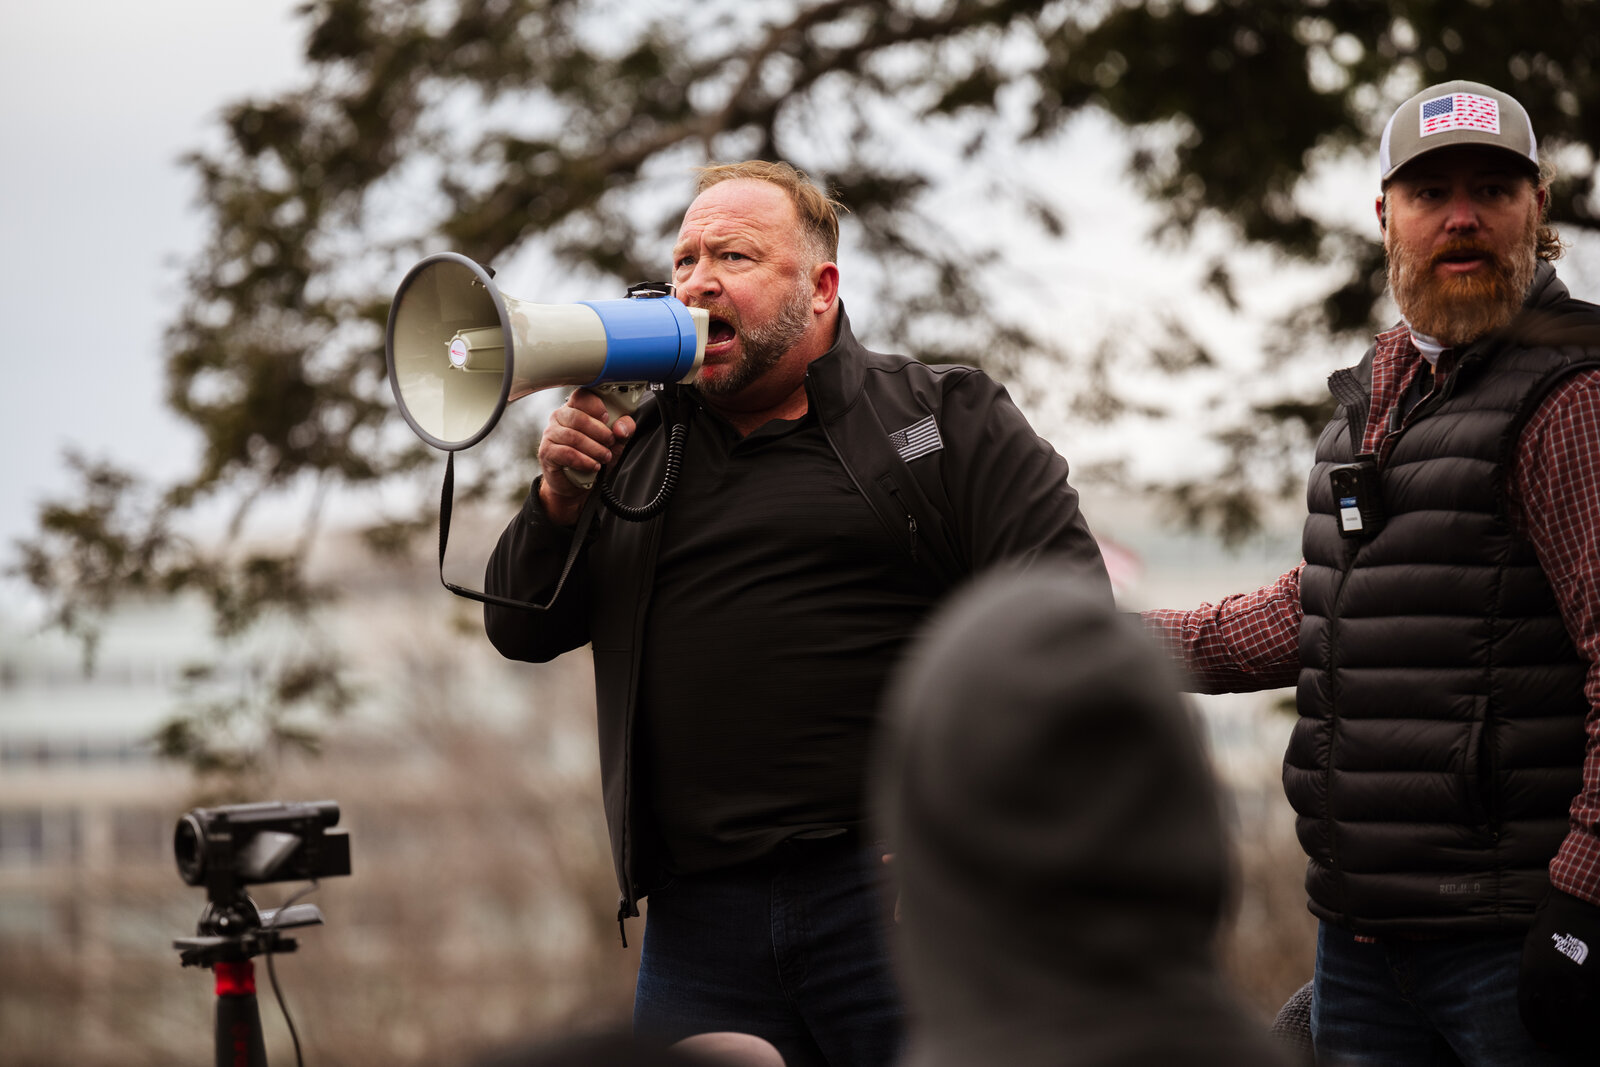 iTunes will soon have a movie about Alex Jones, a conspiracy theorist.